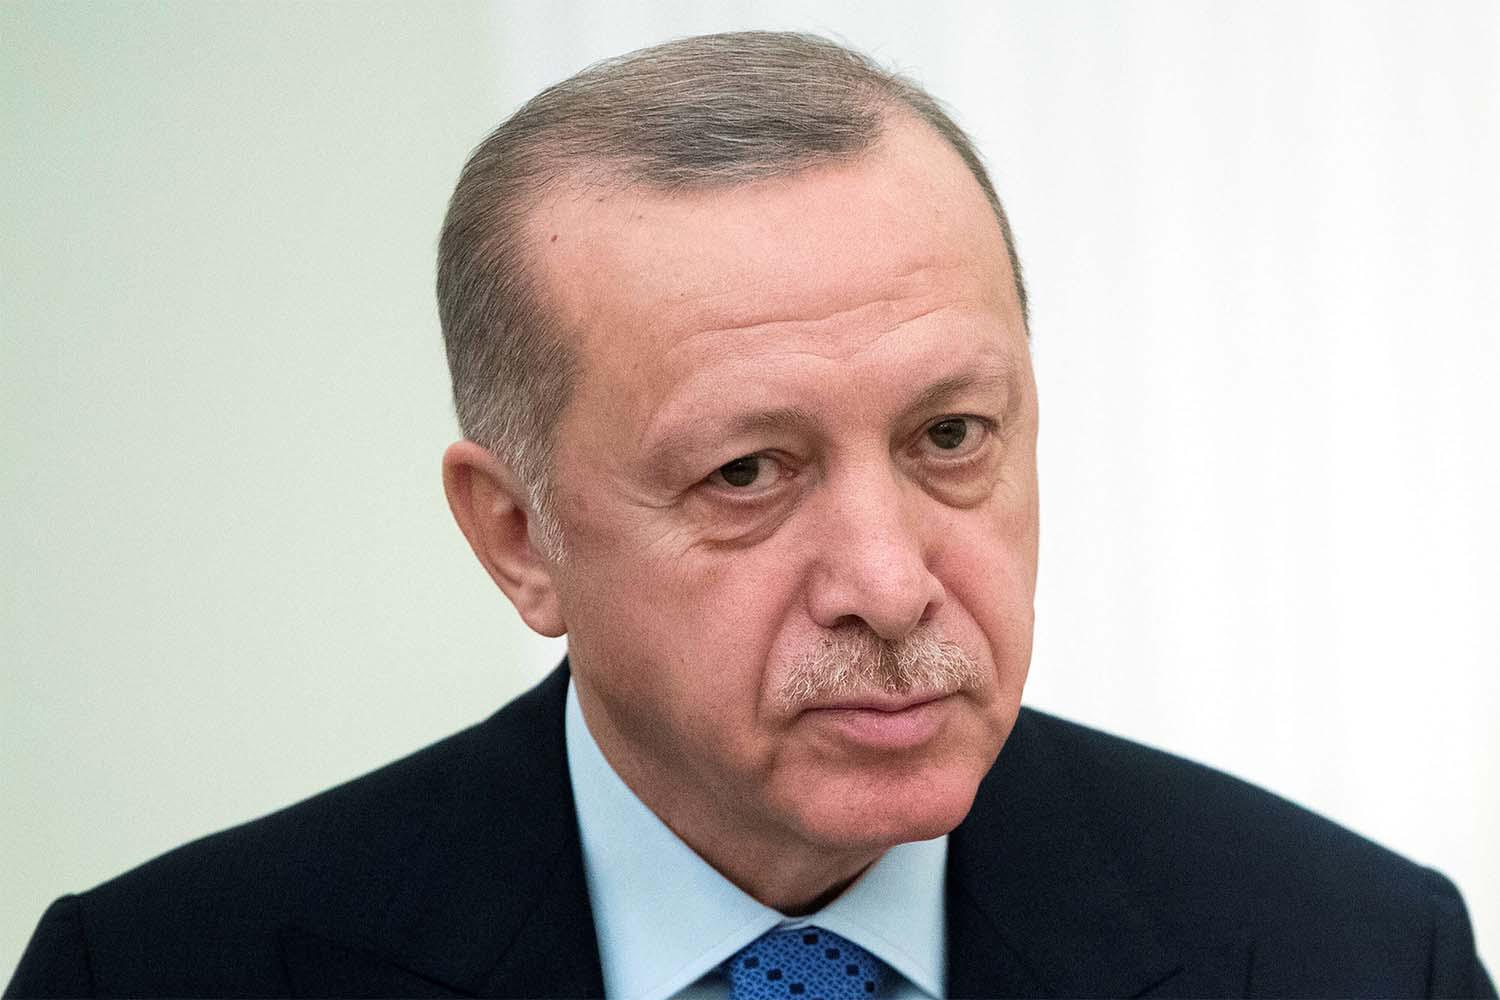 Erdogan said he had no qualm with the Taliban’s beliefs and stating that his government was in accord with them